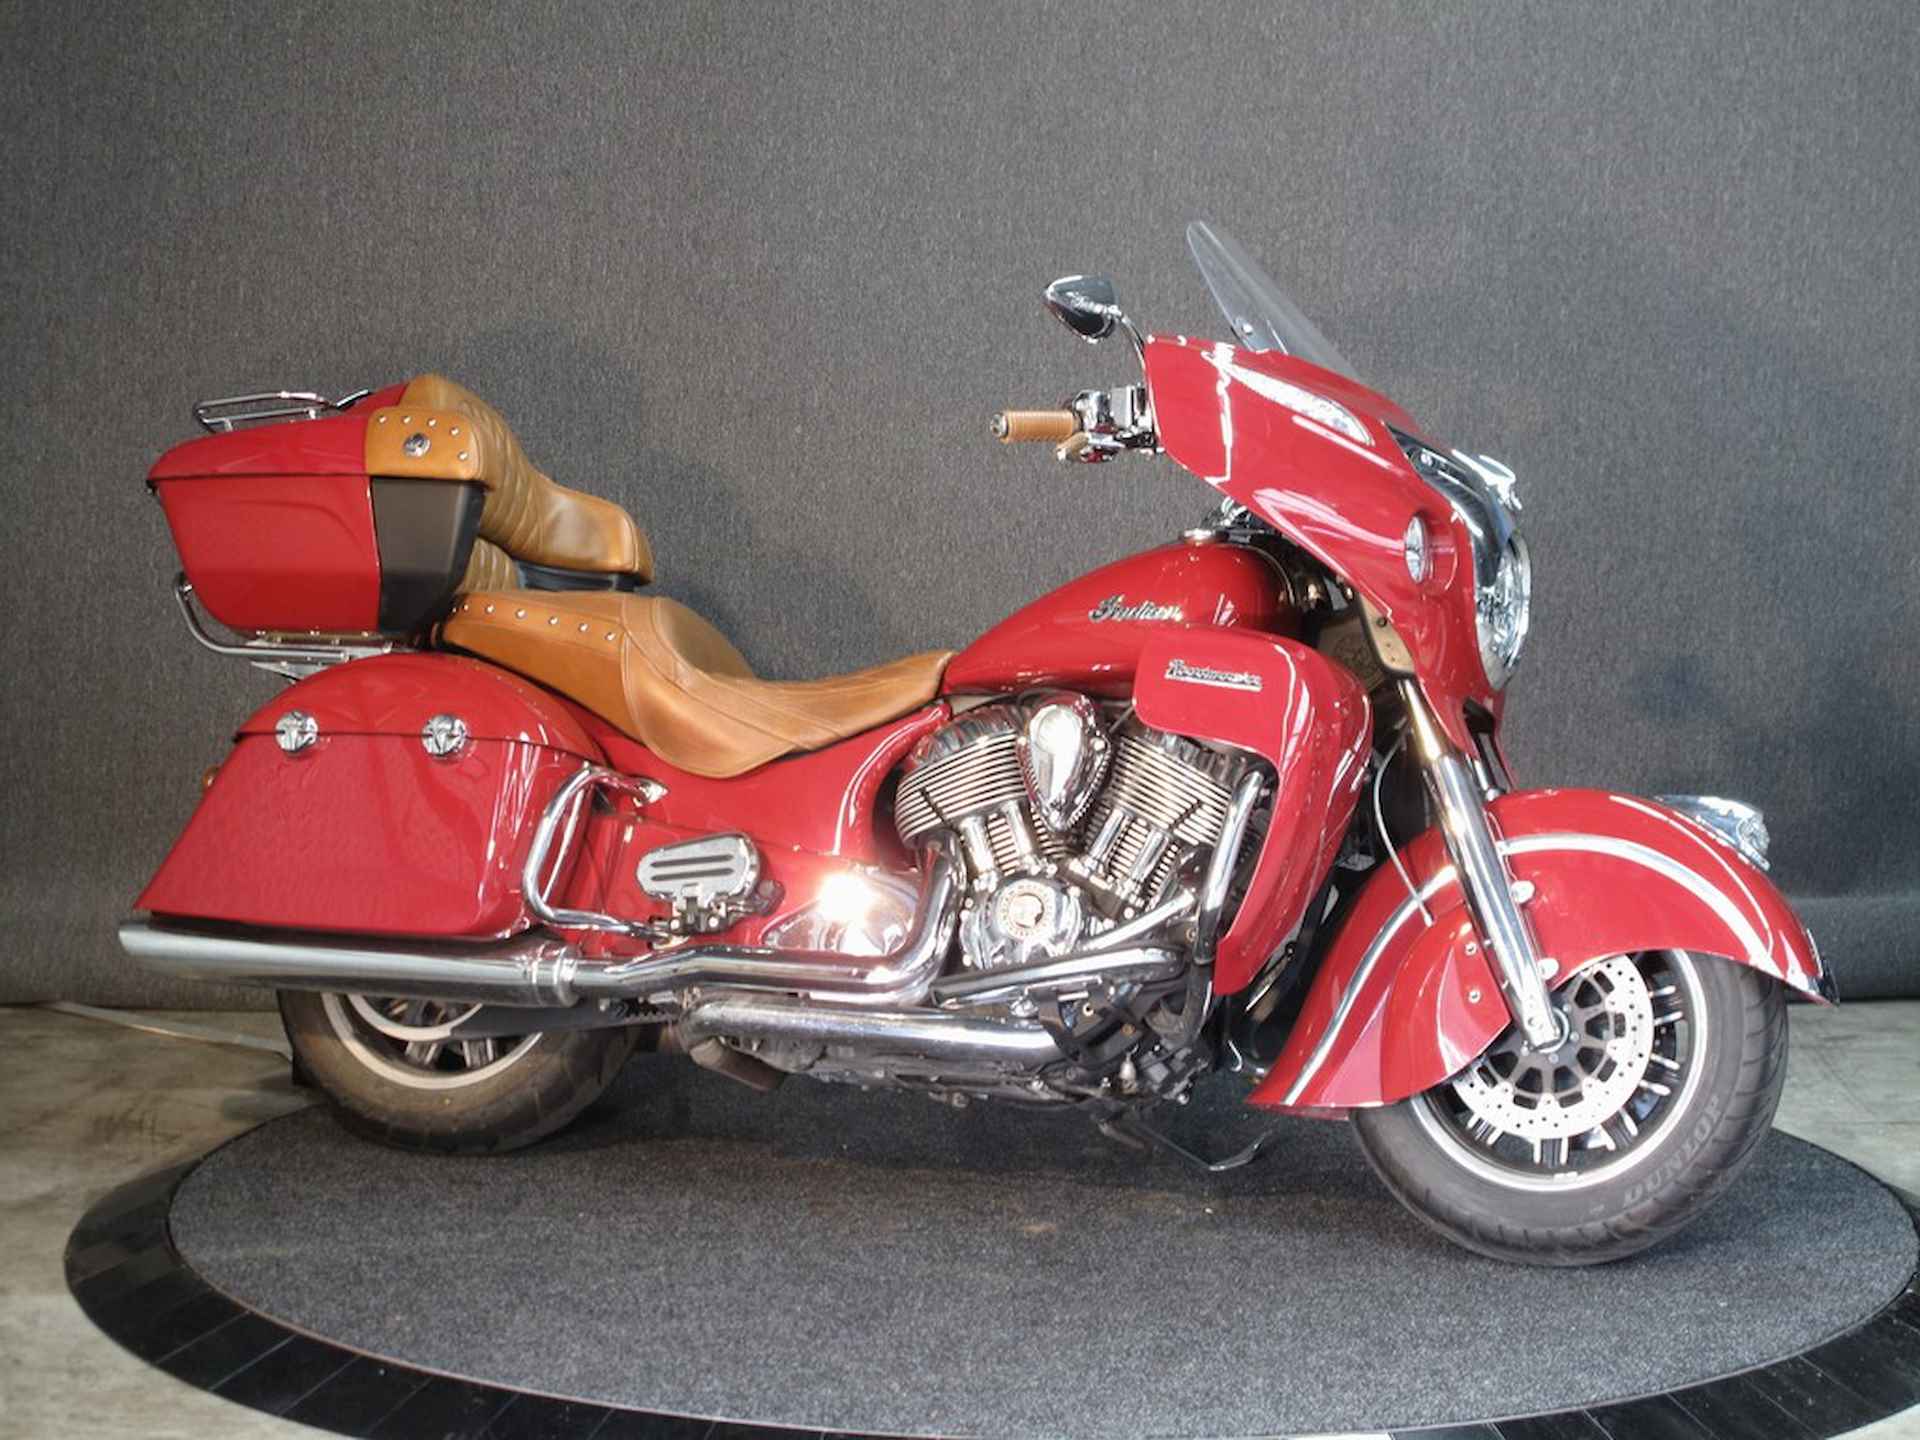 Indian Roadmaster The official Indian Motorcycle Dealer - 7/13